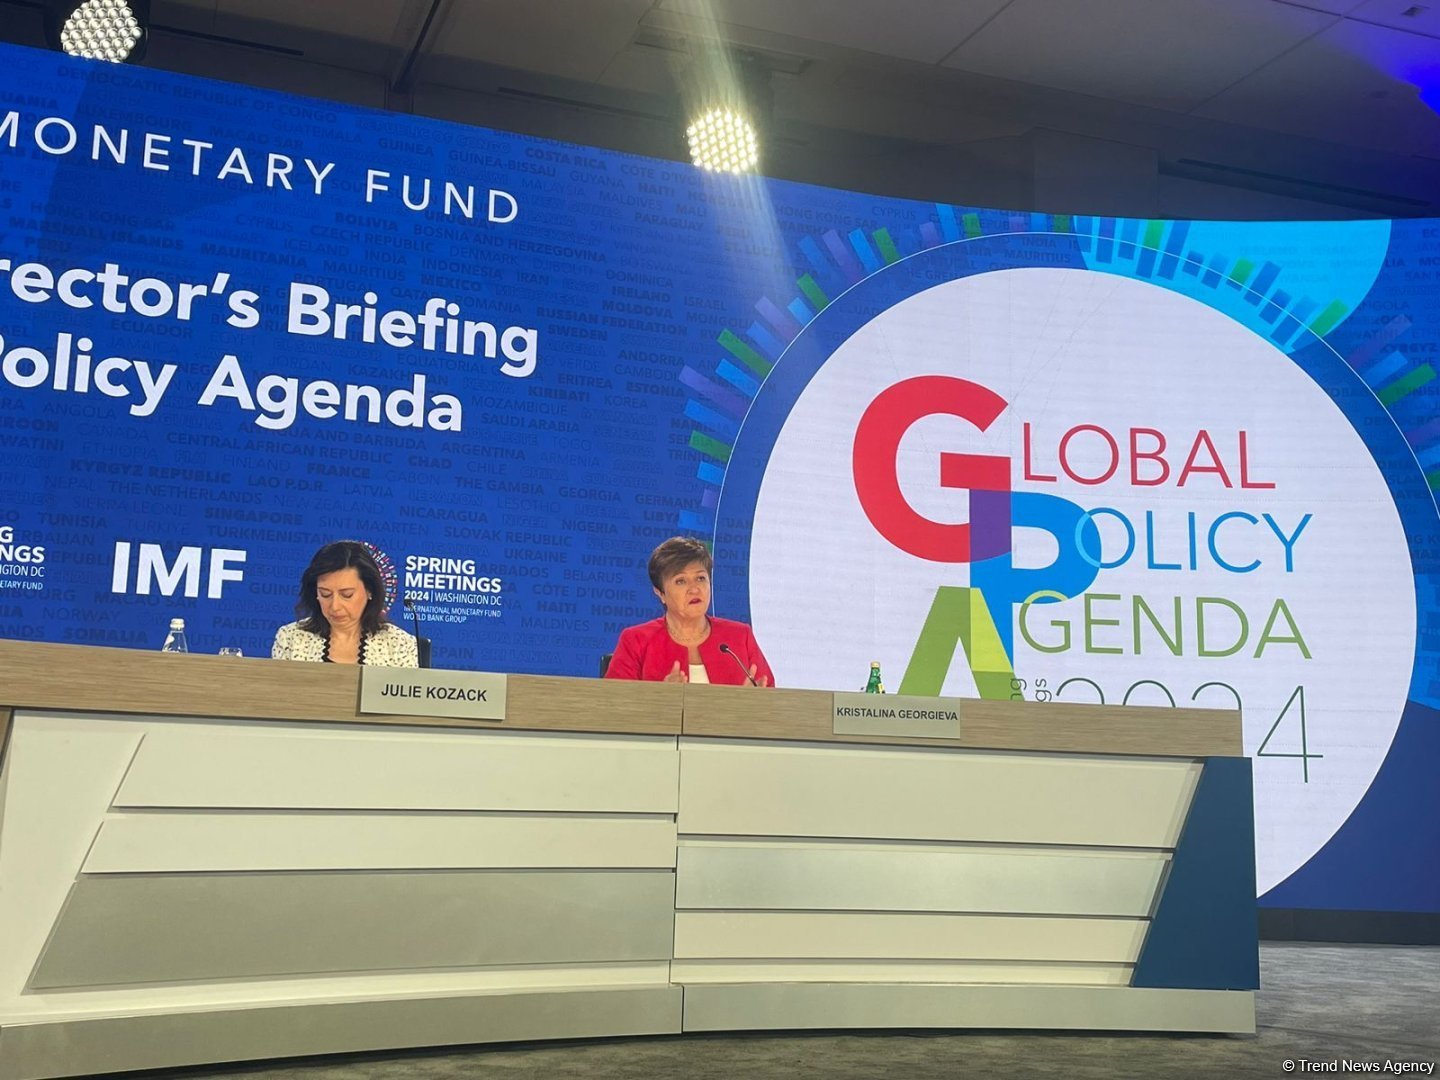 Countries must urgently build fiscal resilience to be prepared for next shock - Kristalina Georgieva